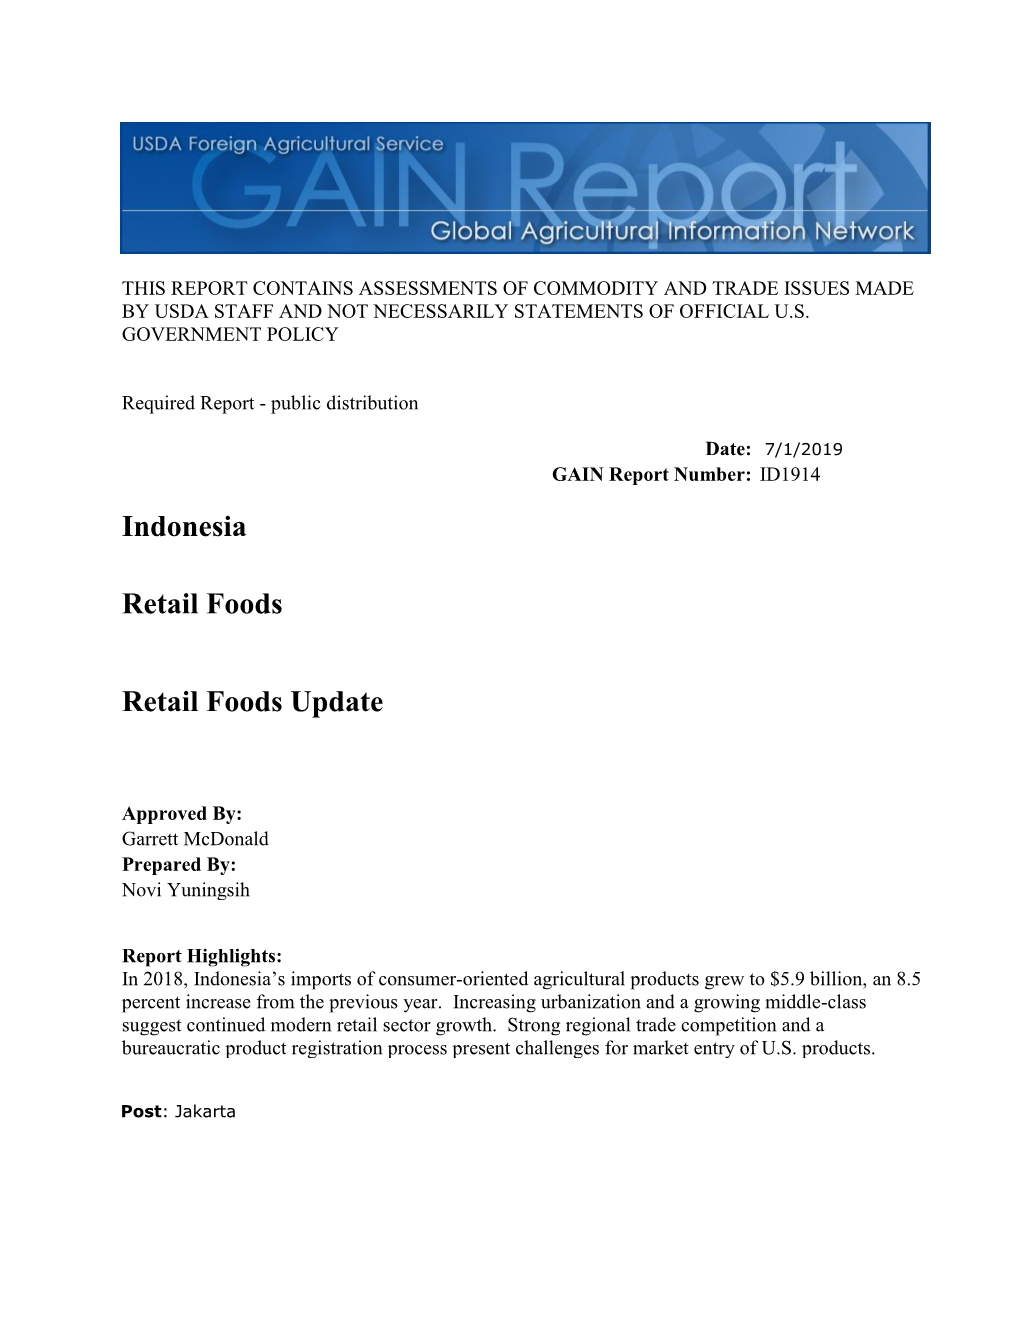 Indonesia: Retail Foods Update - June 29, 2018 for Additional Information